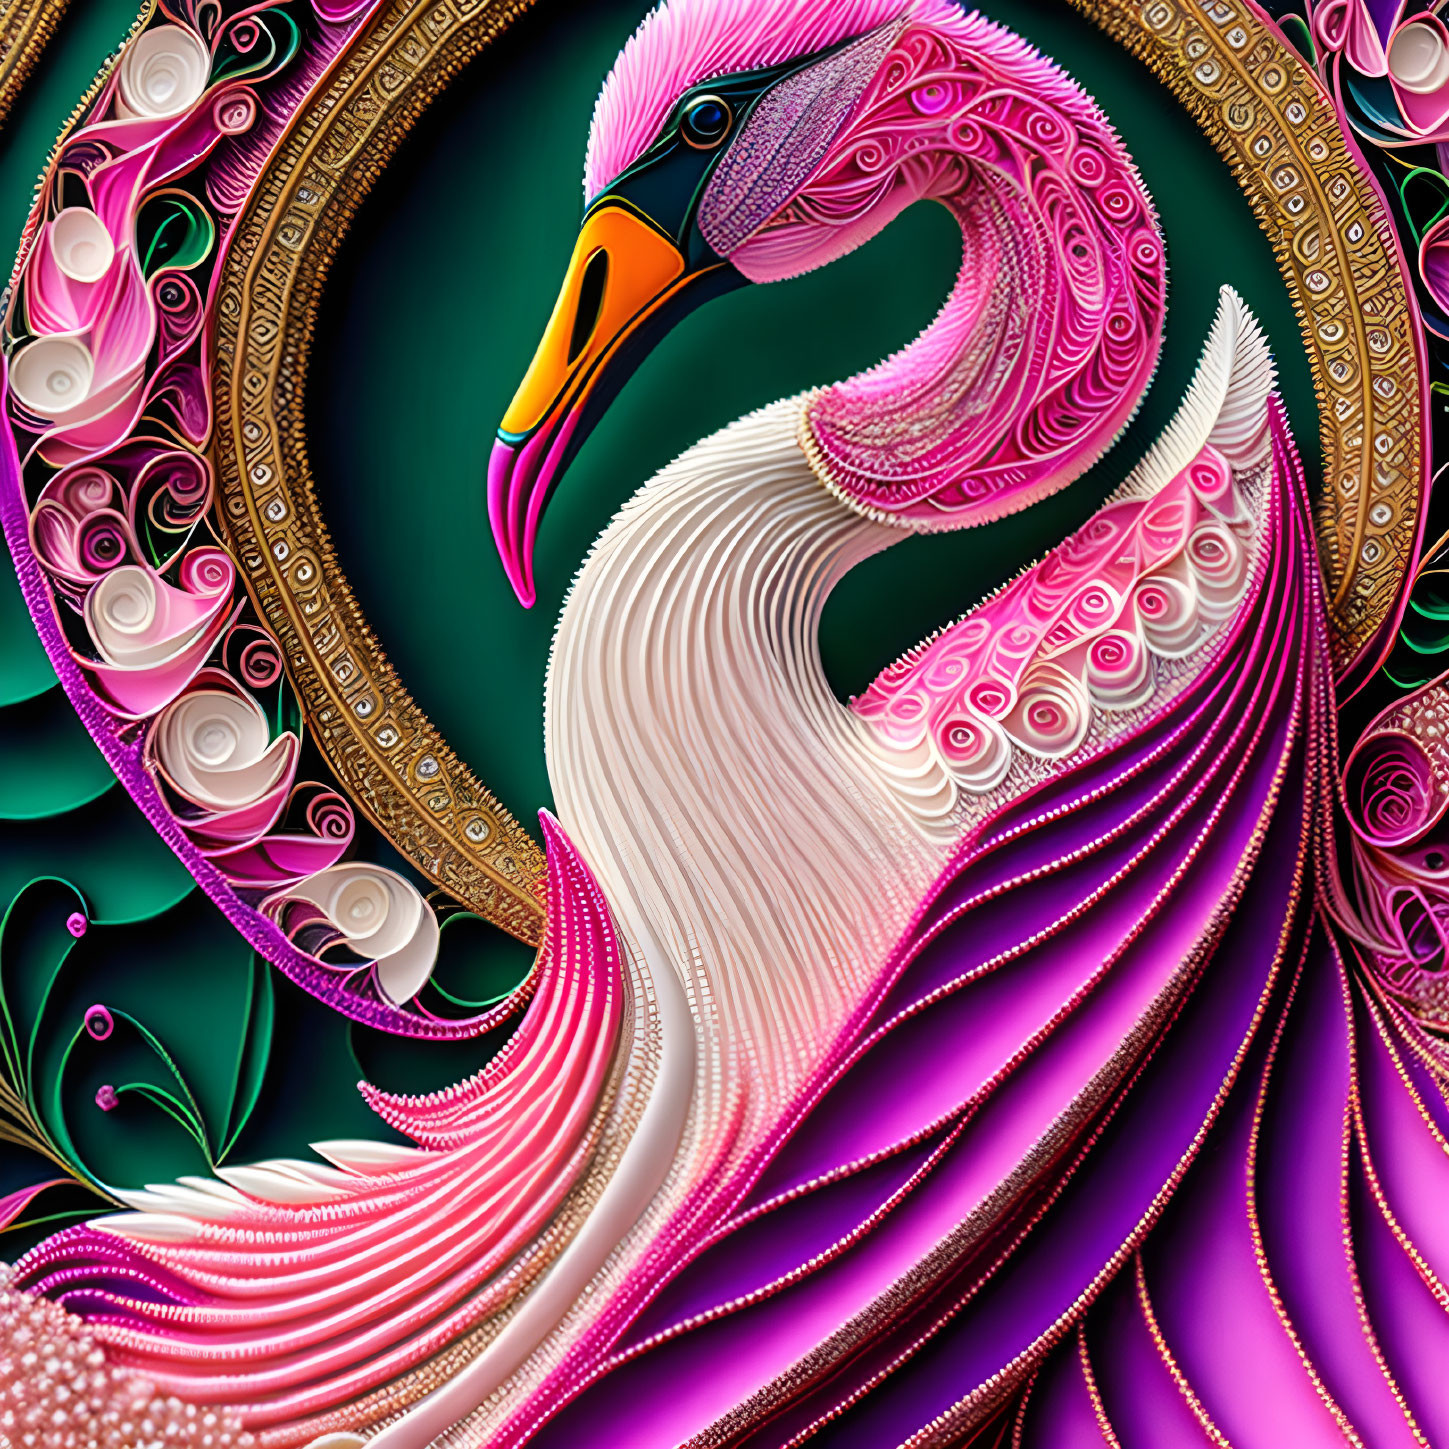 Swan in a Quilled Dress